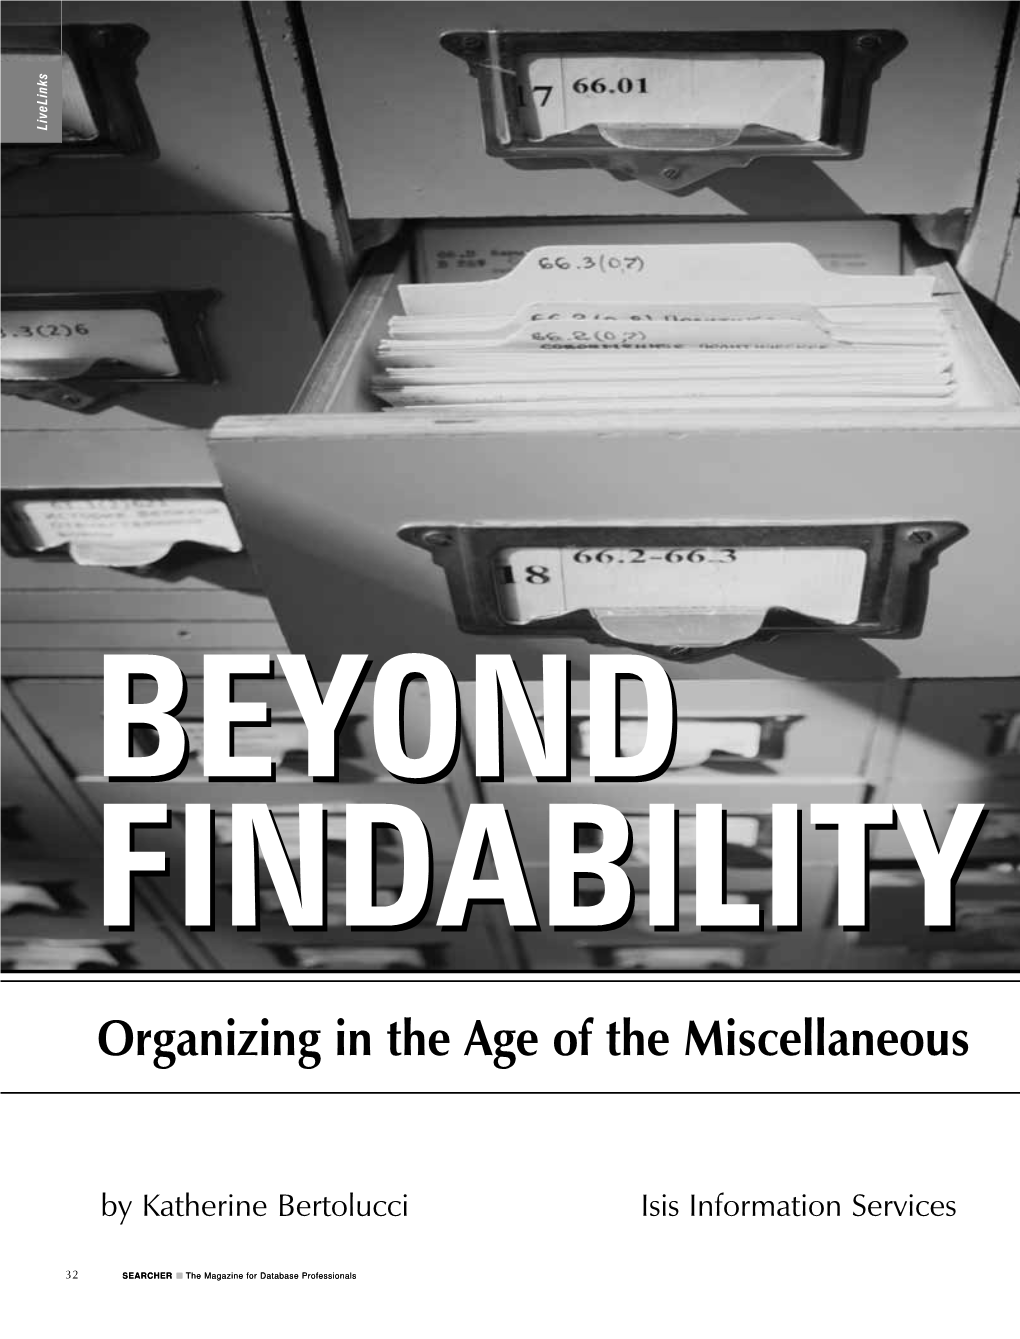 Beyond Findability: Organizing in the Age of the Miscellaneous. Searcher, February, 2009